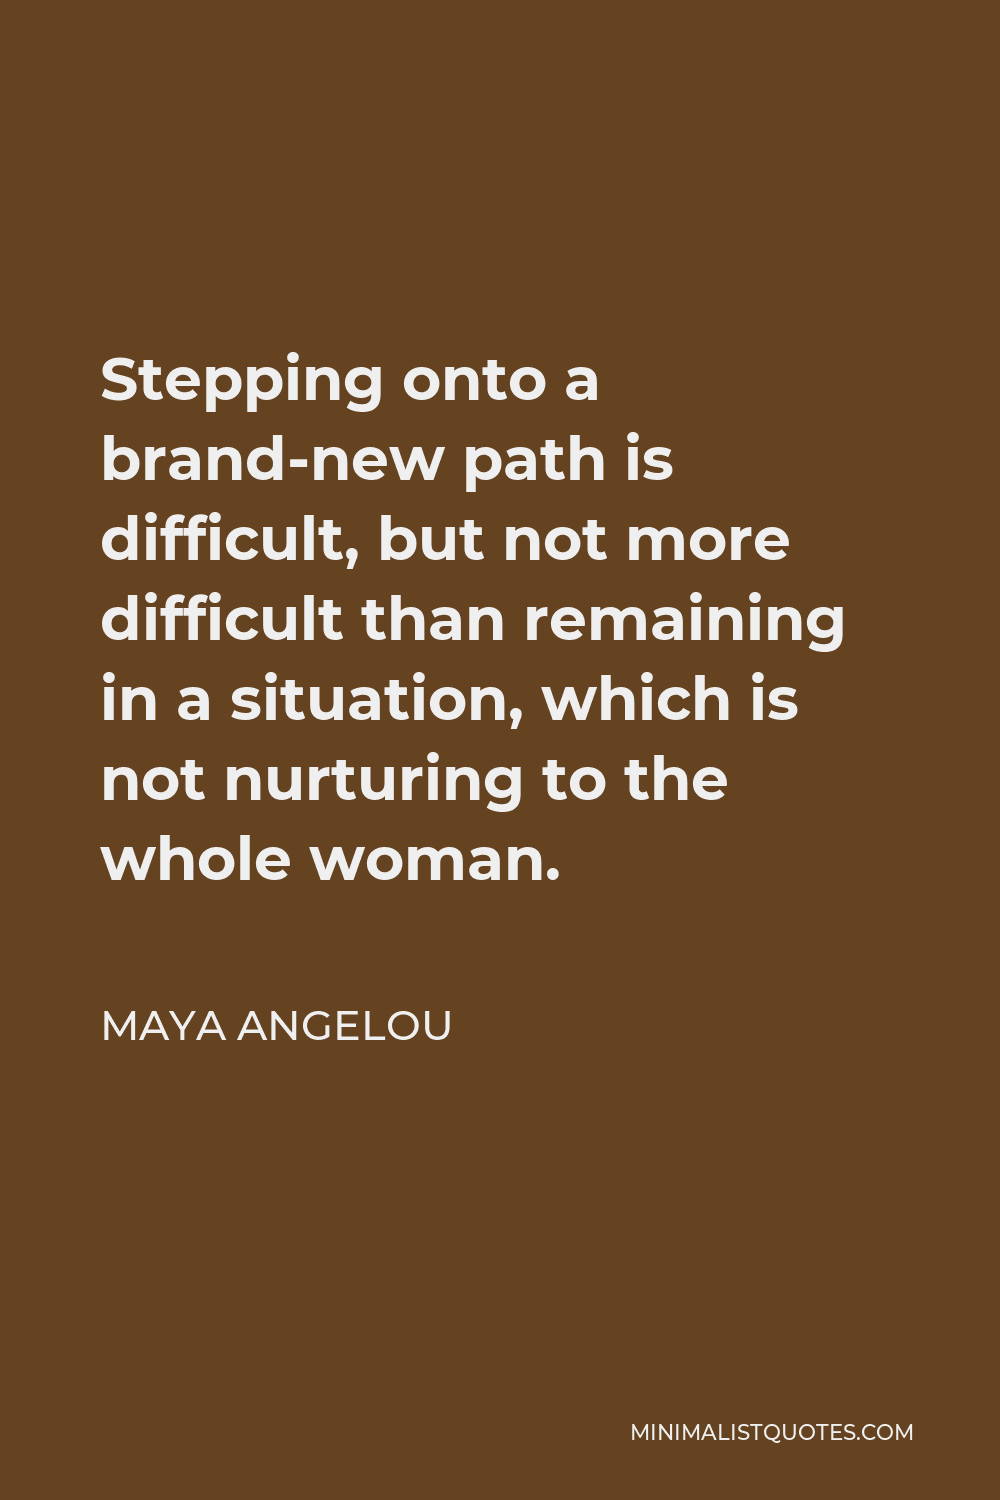 Maya Angelou Quote - Stepping onto a brand-new path is difficult, but not more difficult than remaining in a situation, which is not nurturing to the whole woman.